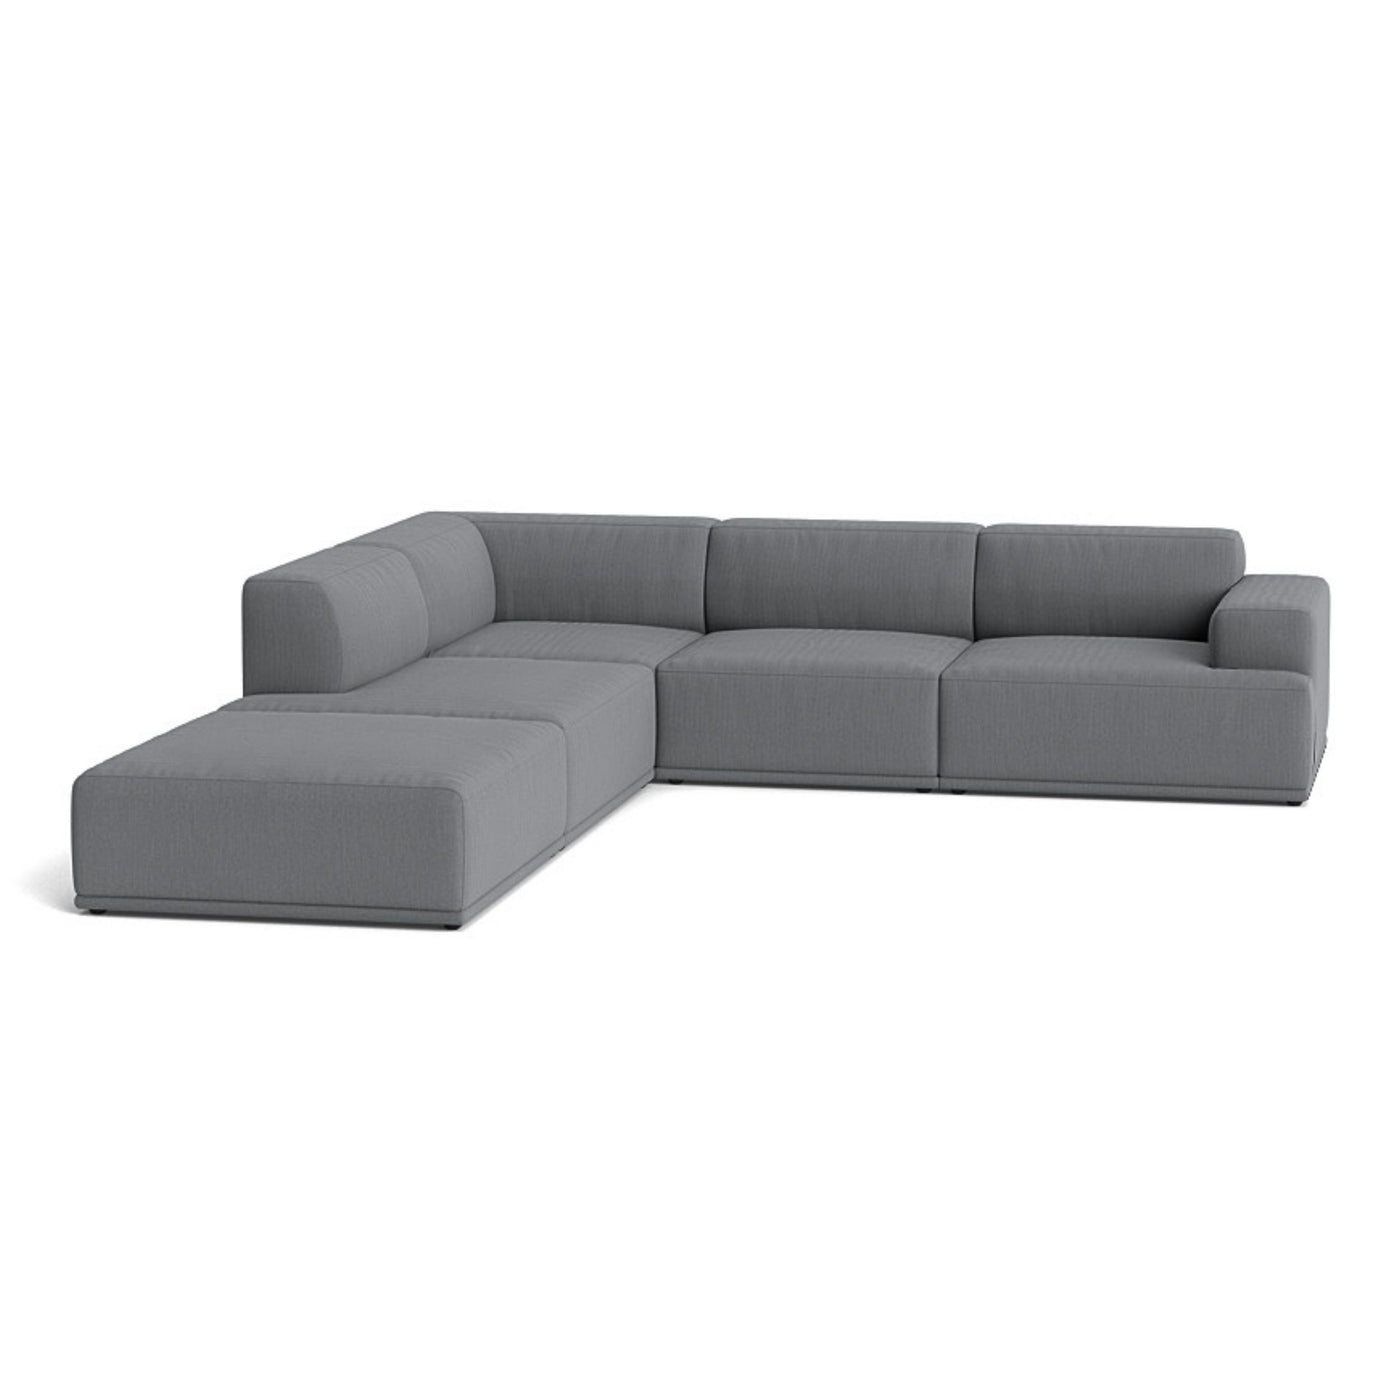 Muuto Connect Soft Modular Corner Sofa, configuration 1. Made-to-order from someday designs. #colour_re-wool-158